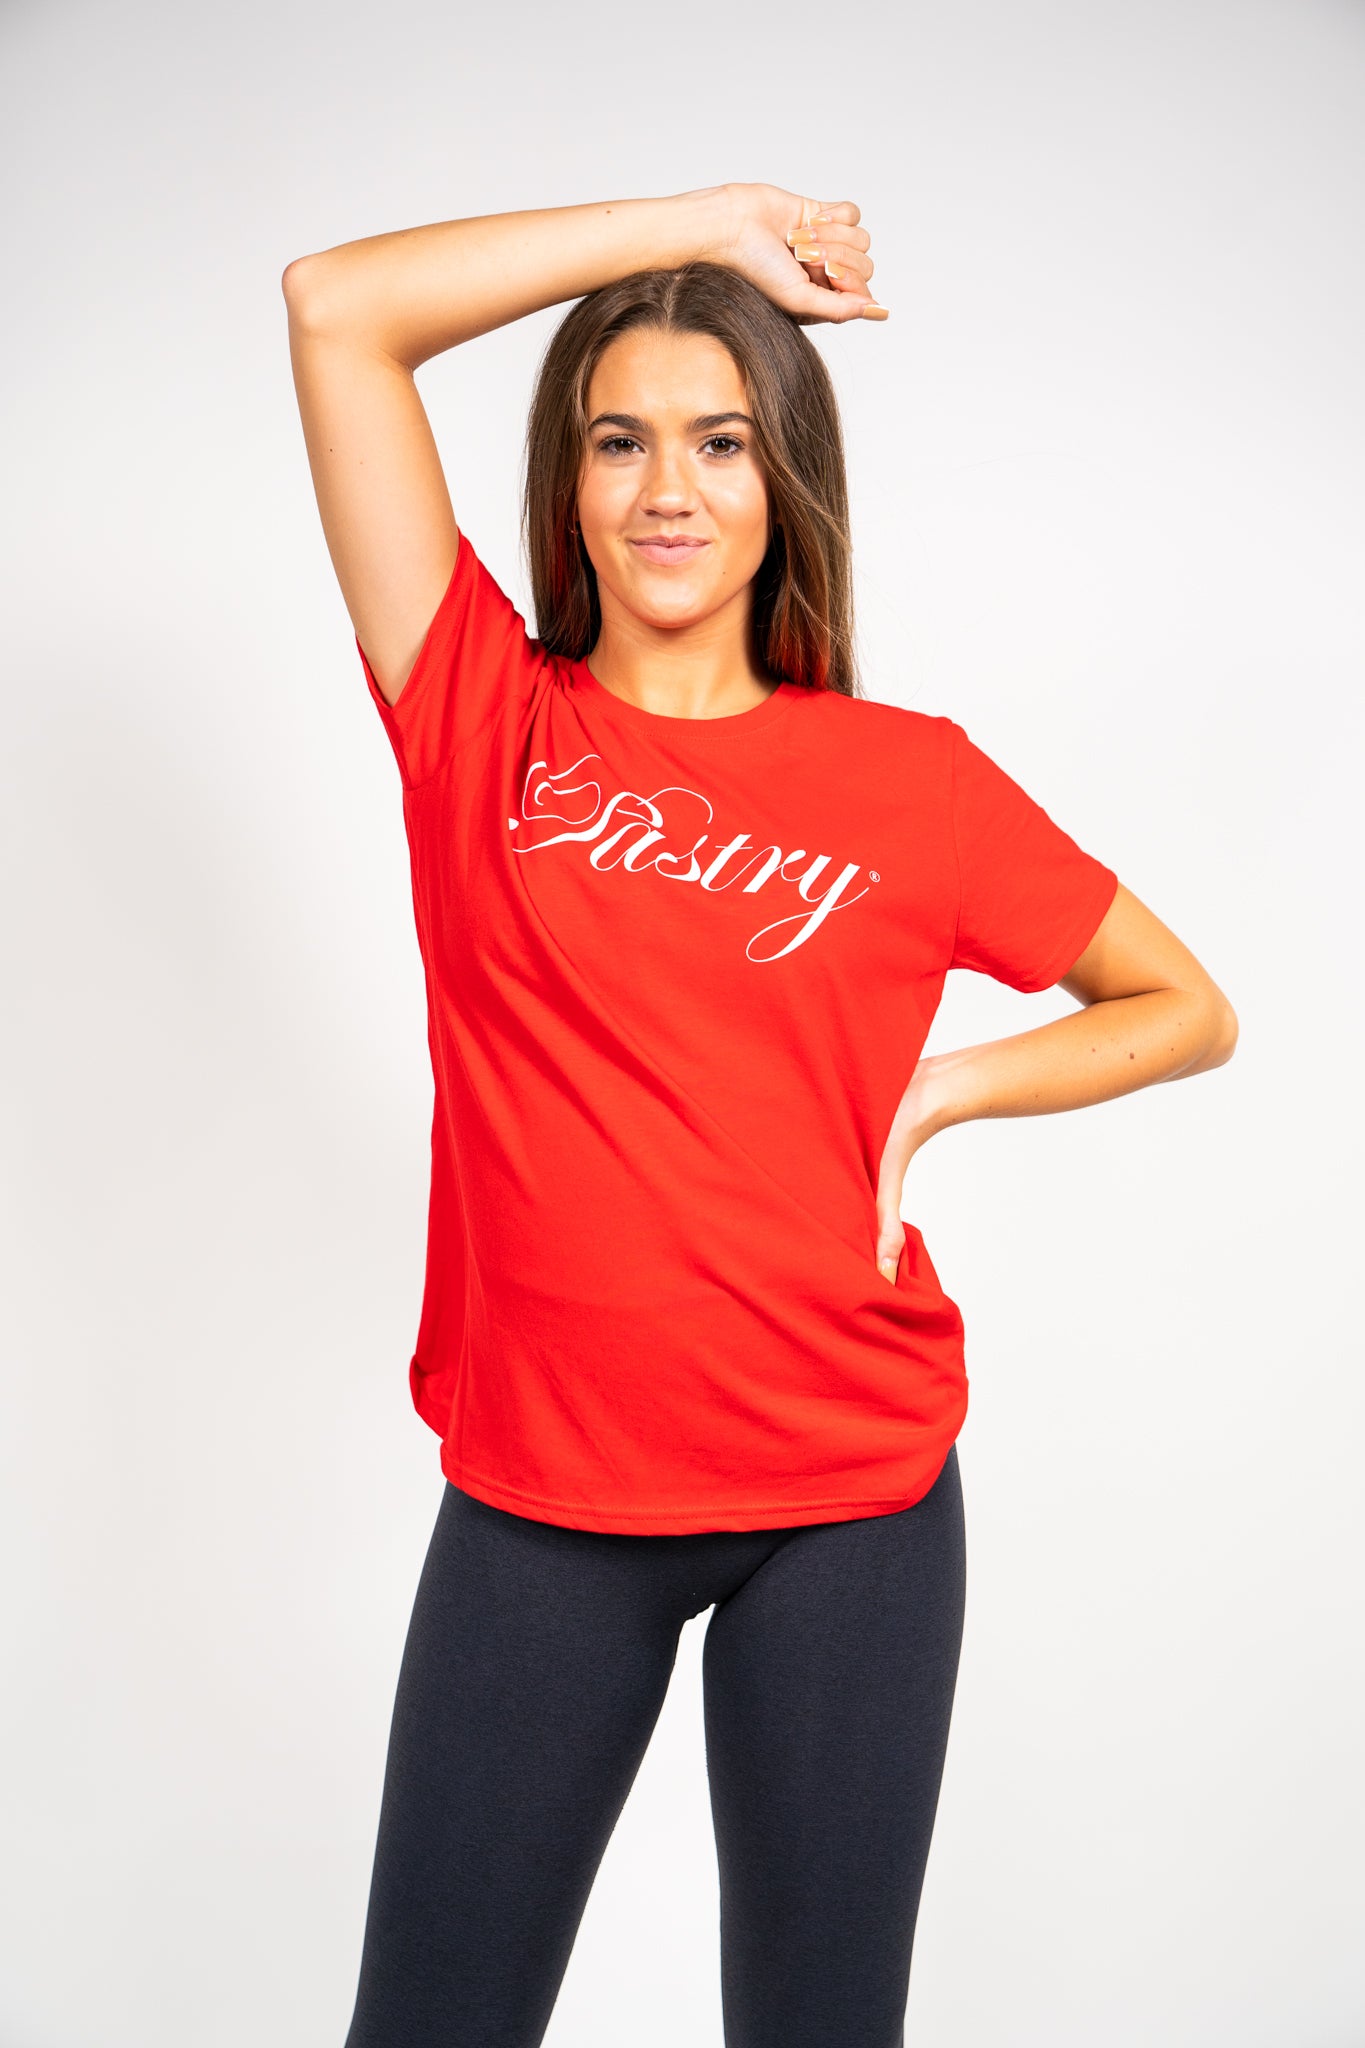 Pastry Tee Shirt New Red with White Sparkle Logo when worn